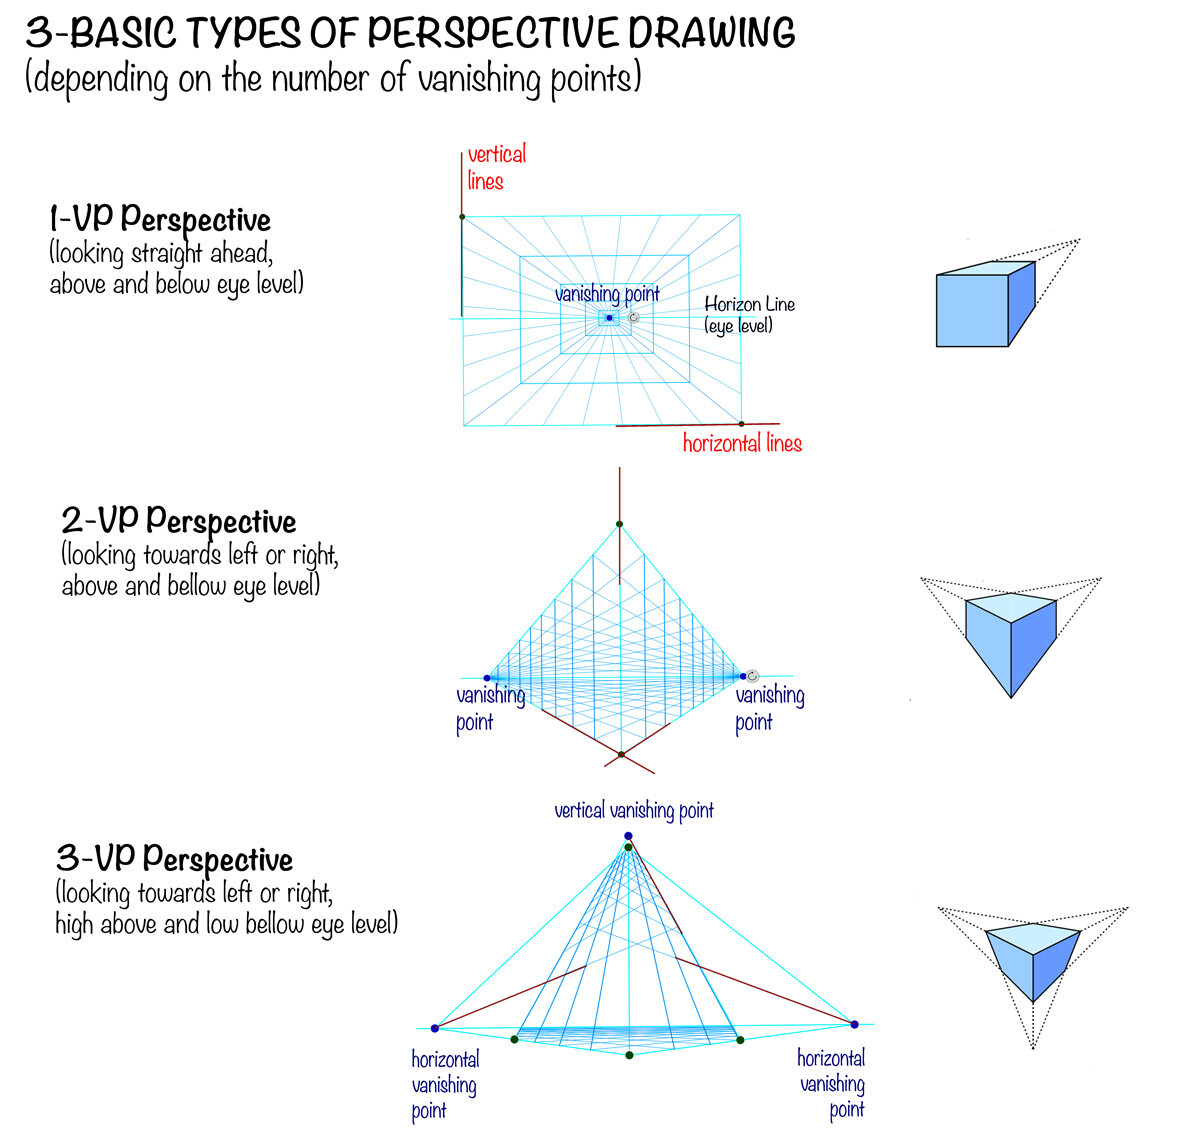 There are 3 major types of perspective drawing defined by the number of primary Vanishing Points (construction points). These are the types of perspective that I’ll be approaching specifically in this article but I’ll also go in greater detail later on, i